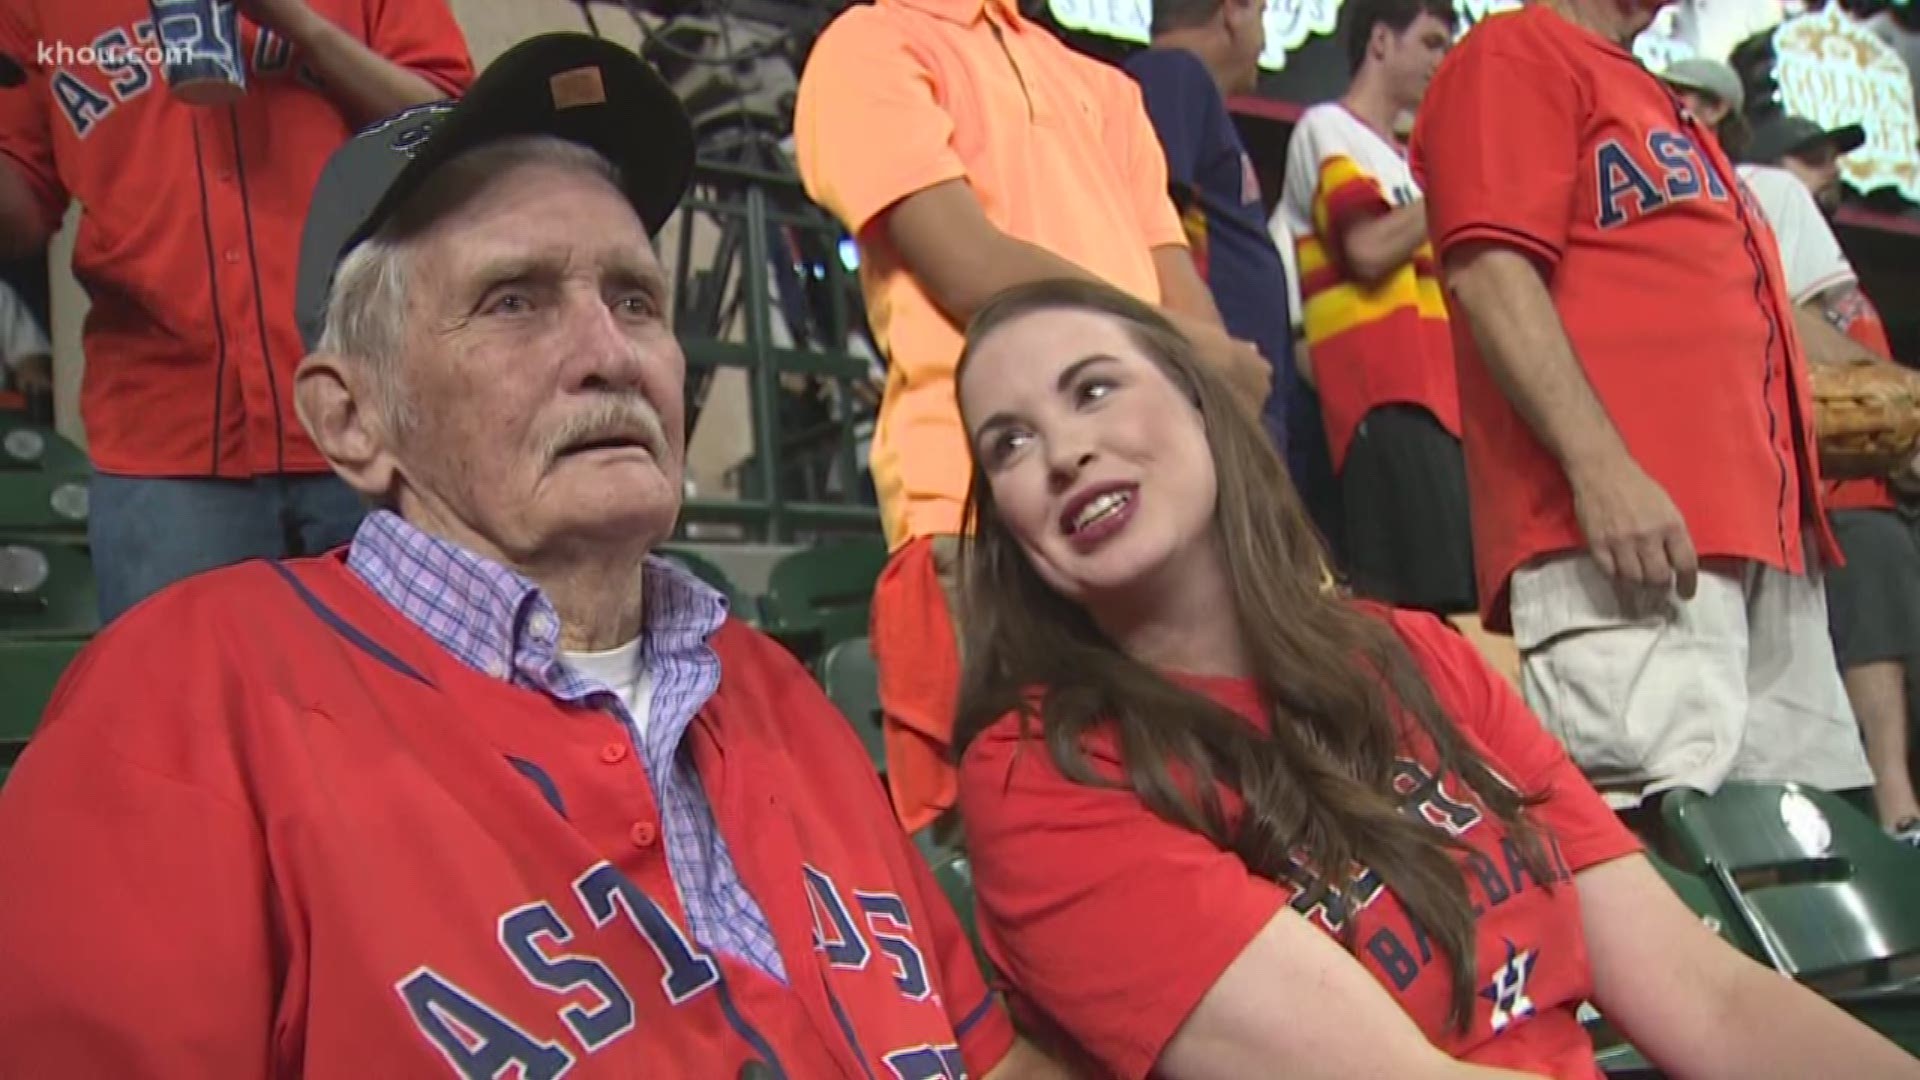 The final score wasn't the outcome 87-year-old Jack King and his granddaughter Courtney were hoping for, but the memories they made were priceless.